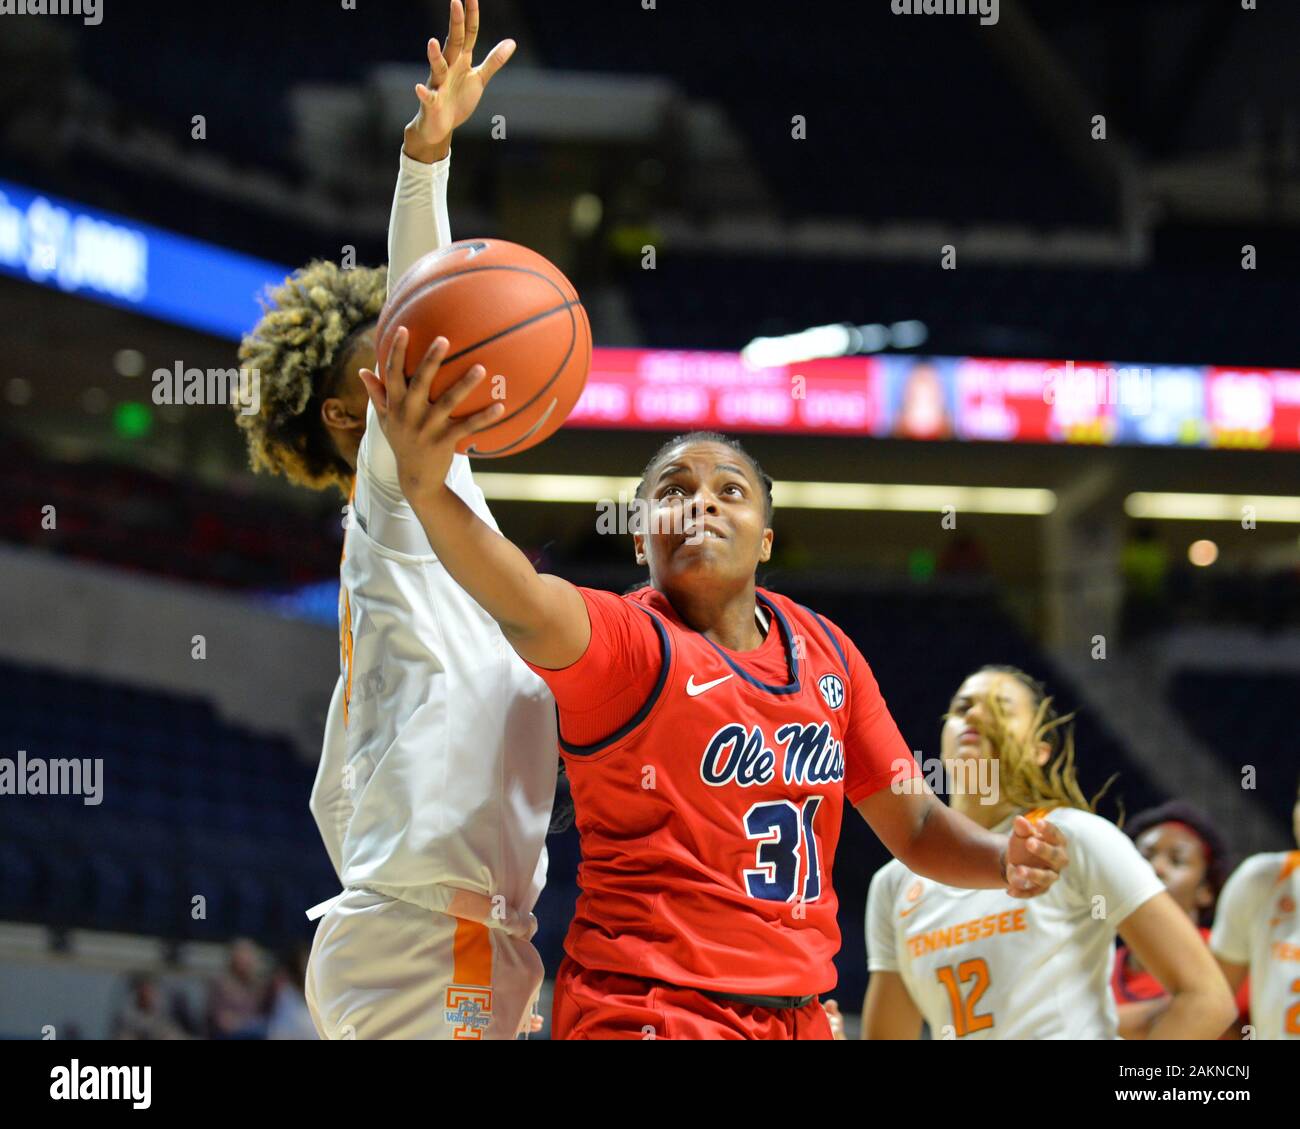 Oxford, MS, USA. 09th Jan, 2020. Ole' Miss guard, Deia Cage (31), goes to the hoop for a lay up during the NCAA women's basketball game between the Tennessee Lady Volunteers and the Ole' Miss Rebels at The Pavillion in Oxford, MS. Kevin Langley/Sports South Media/CSM/Alamy Live News Stock Photo